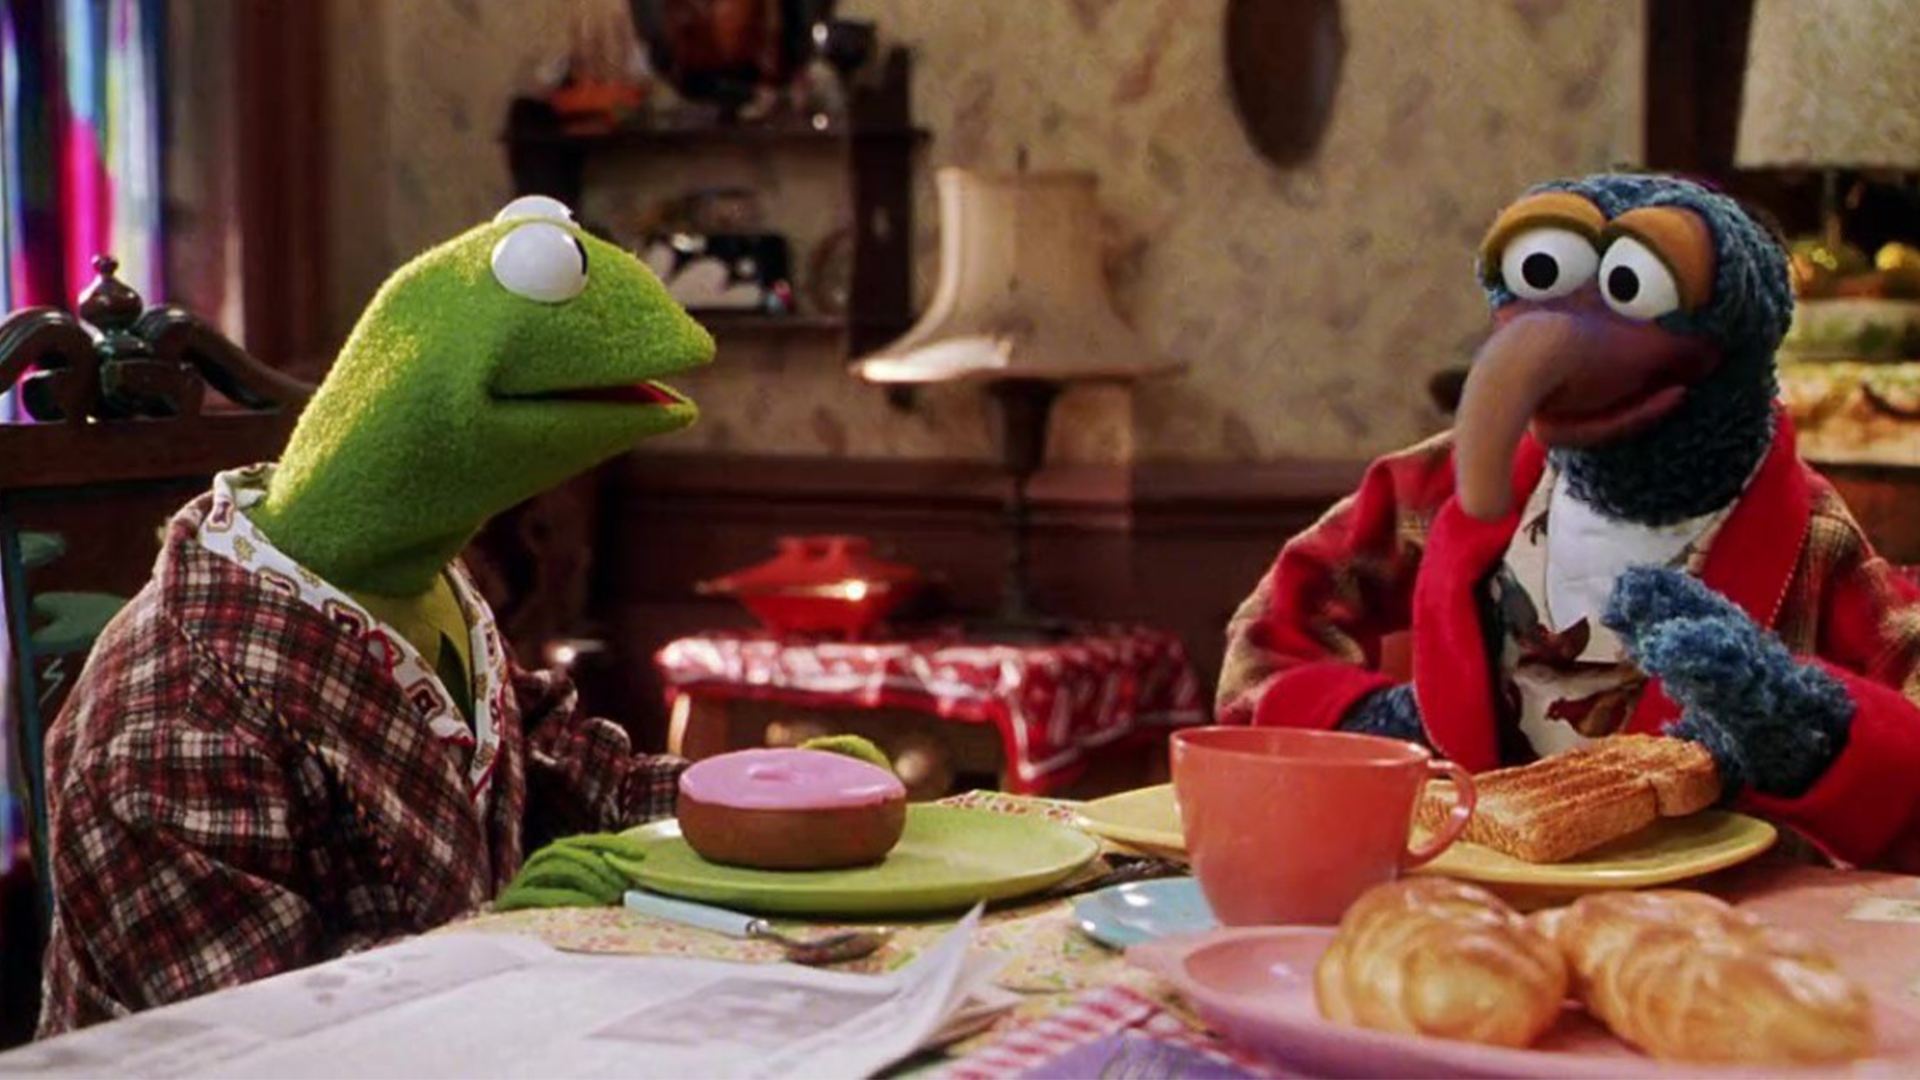 Kermit and Gonzo in Muppets from Space